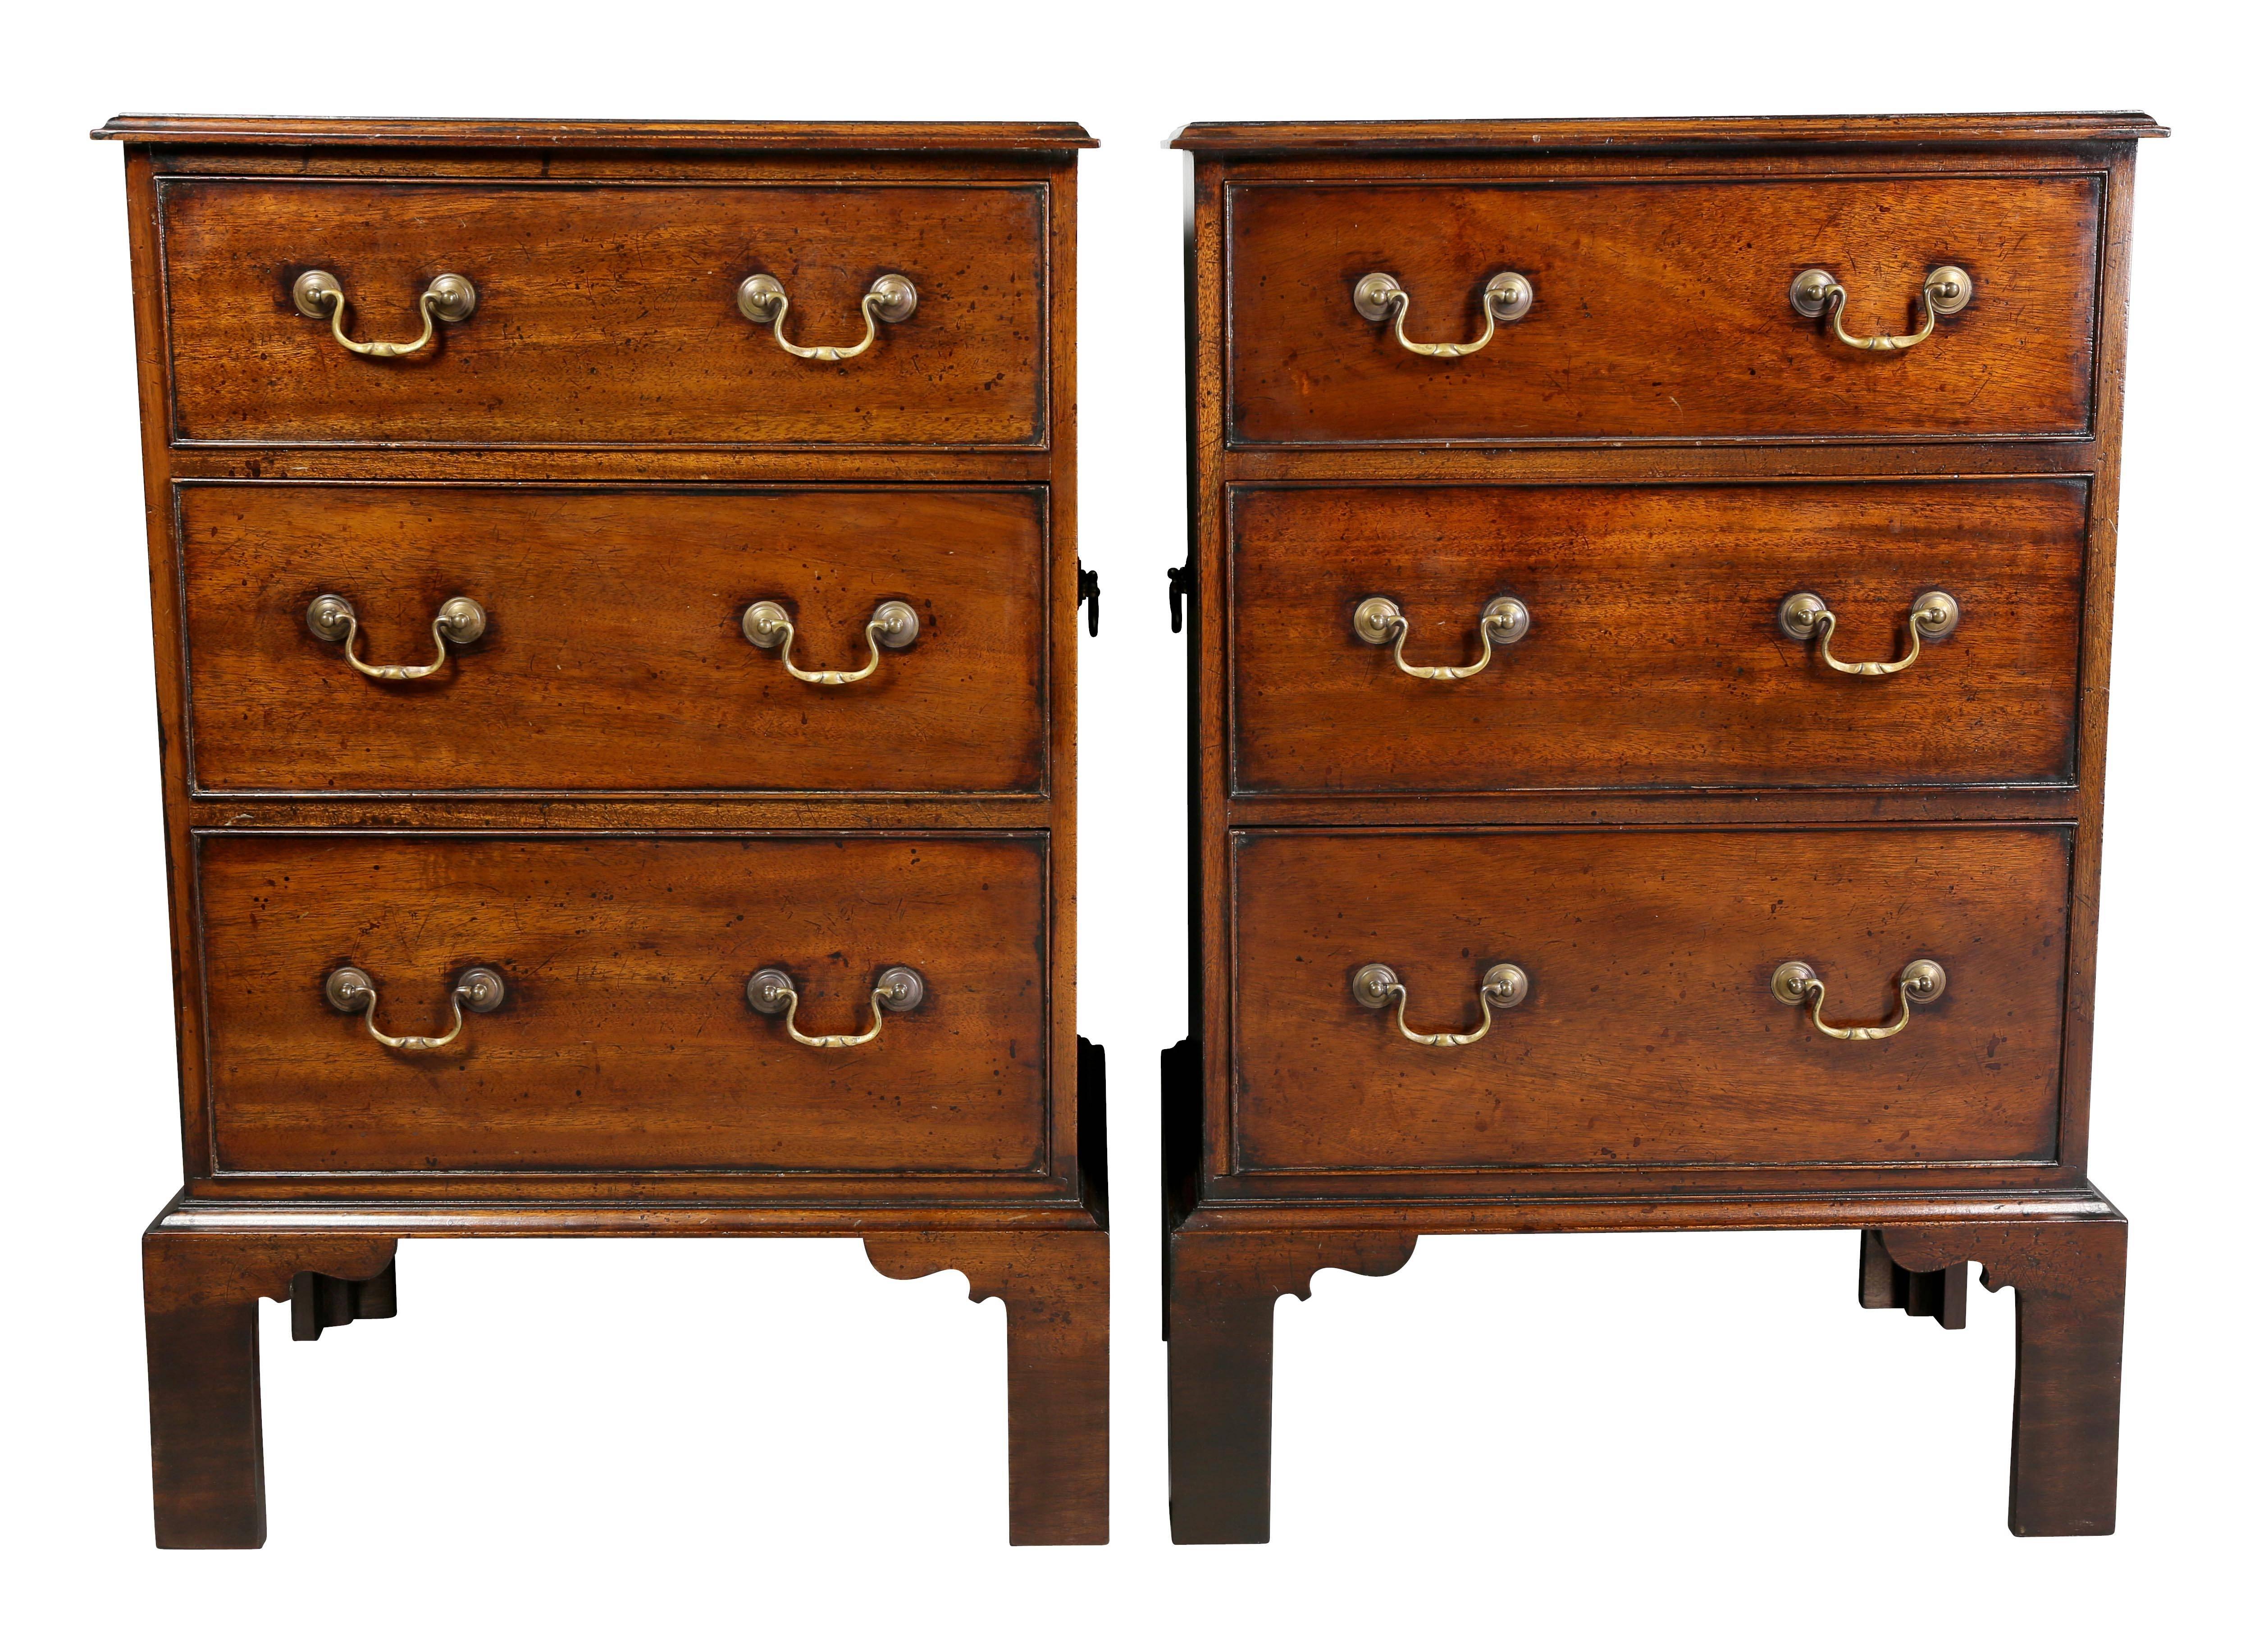 English Pair Of George III Style Mahogany Dwarf Chests Of Drawers